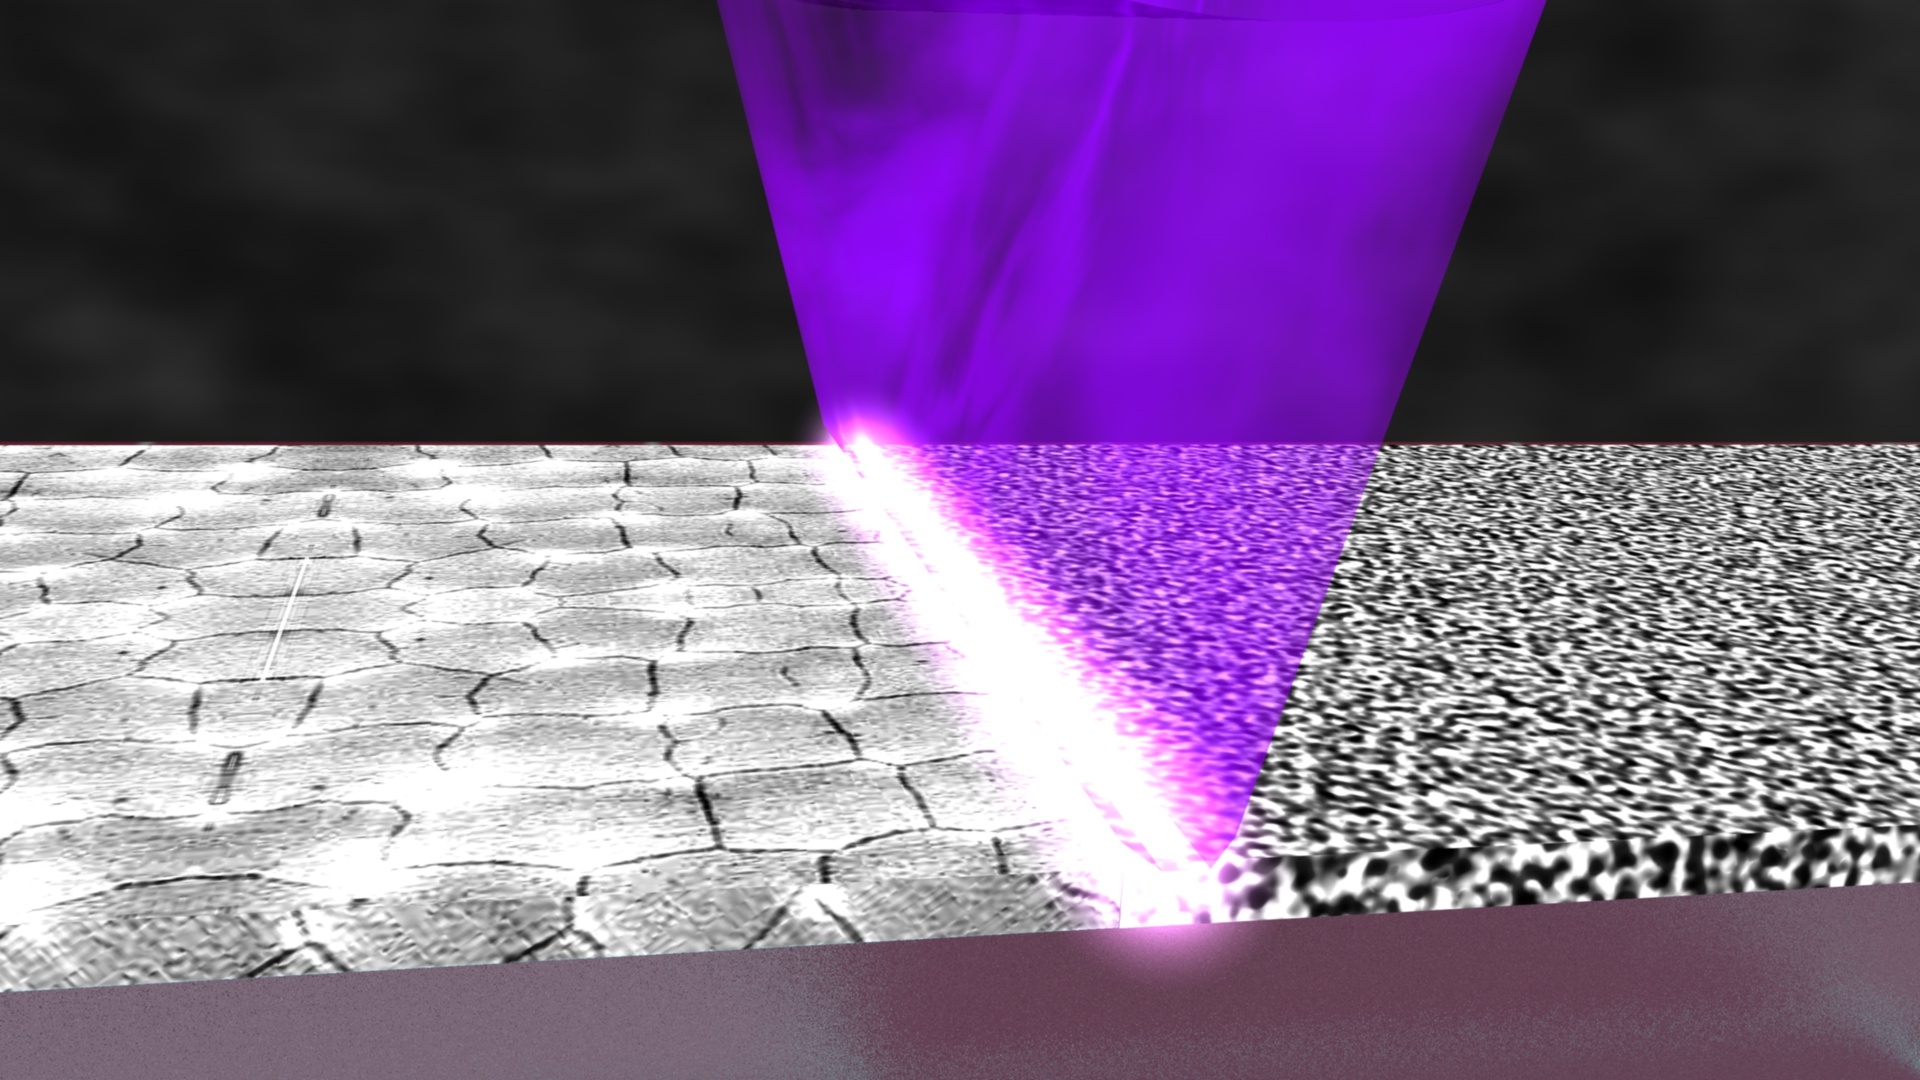 Annealing of silicon has contributed greatly to the renaissance of excimer lasers. Now, researchers are considering what other materials might be suitable for this method.